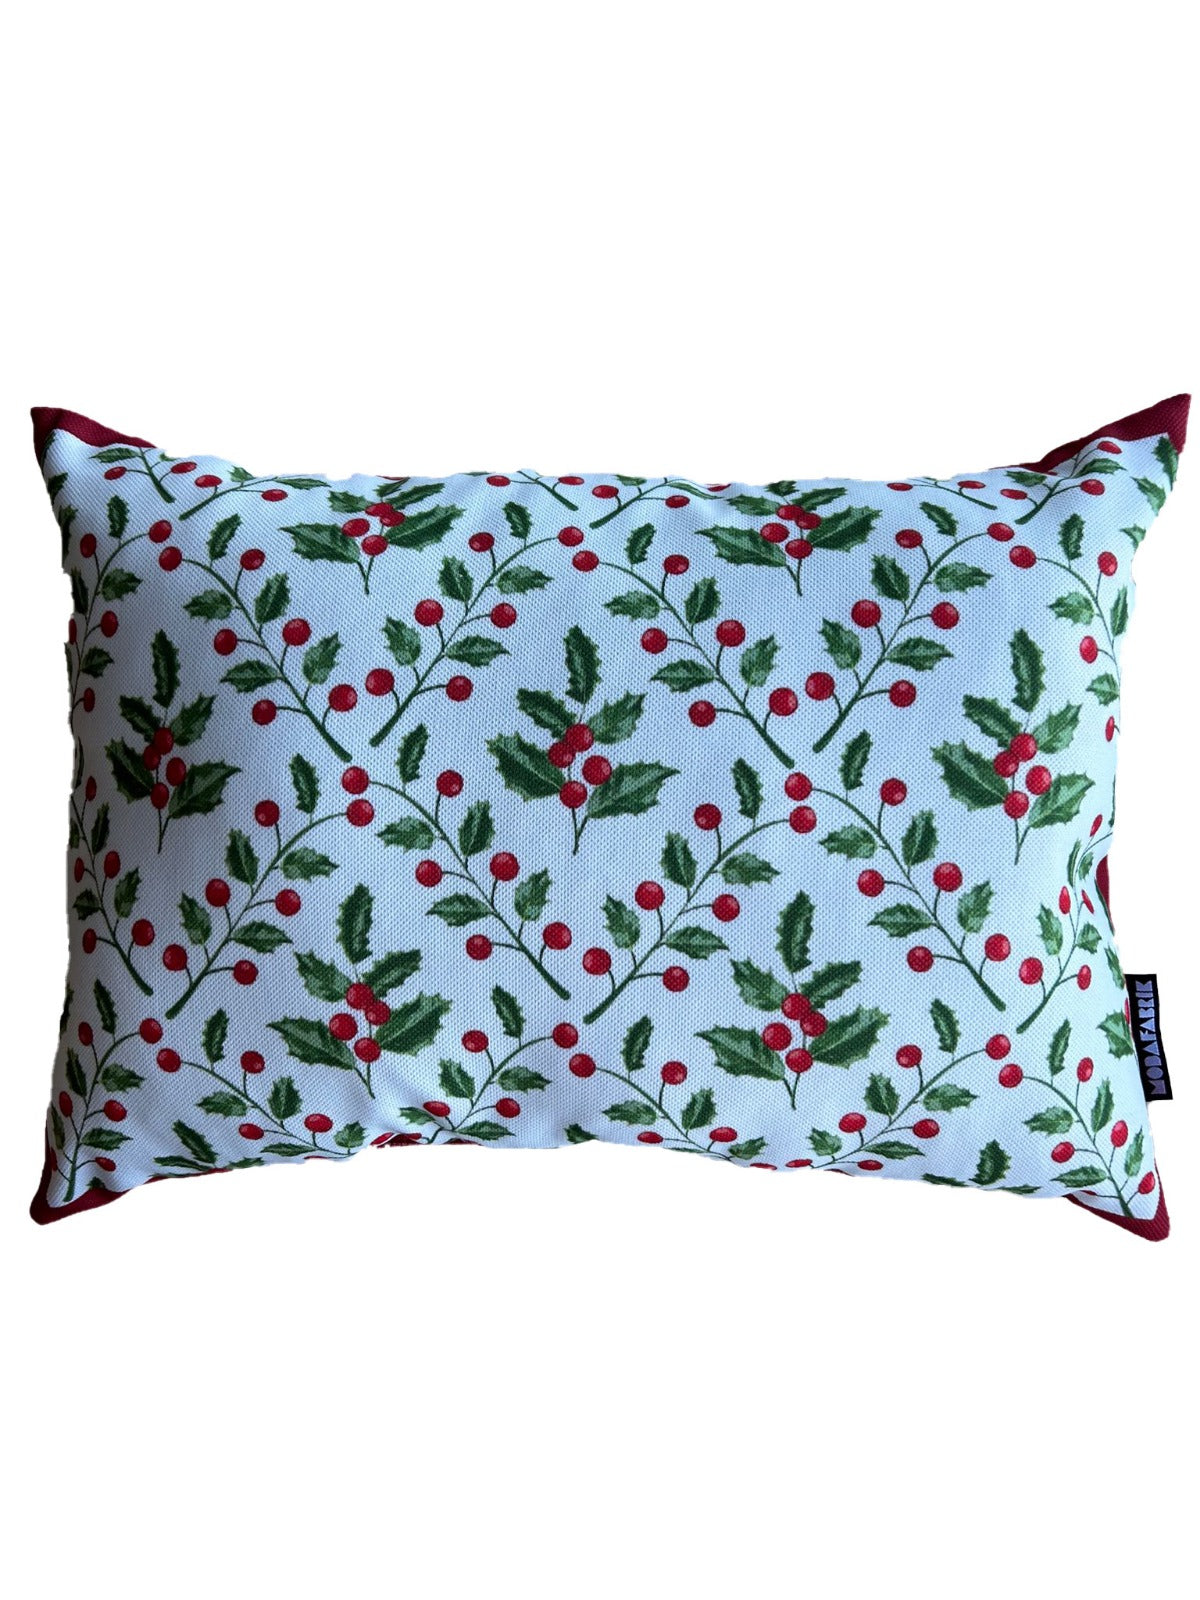 Holly Branch and Berries Pillow Cover, Rectangular, 18 1/2L x 13" W - Wear Sierra